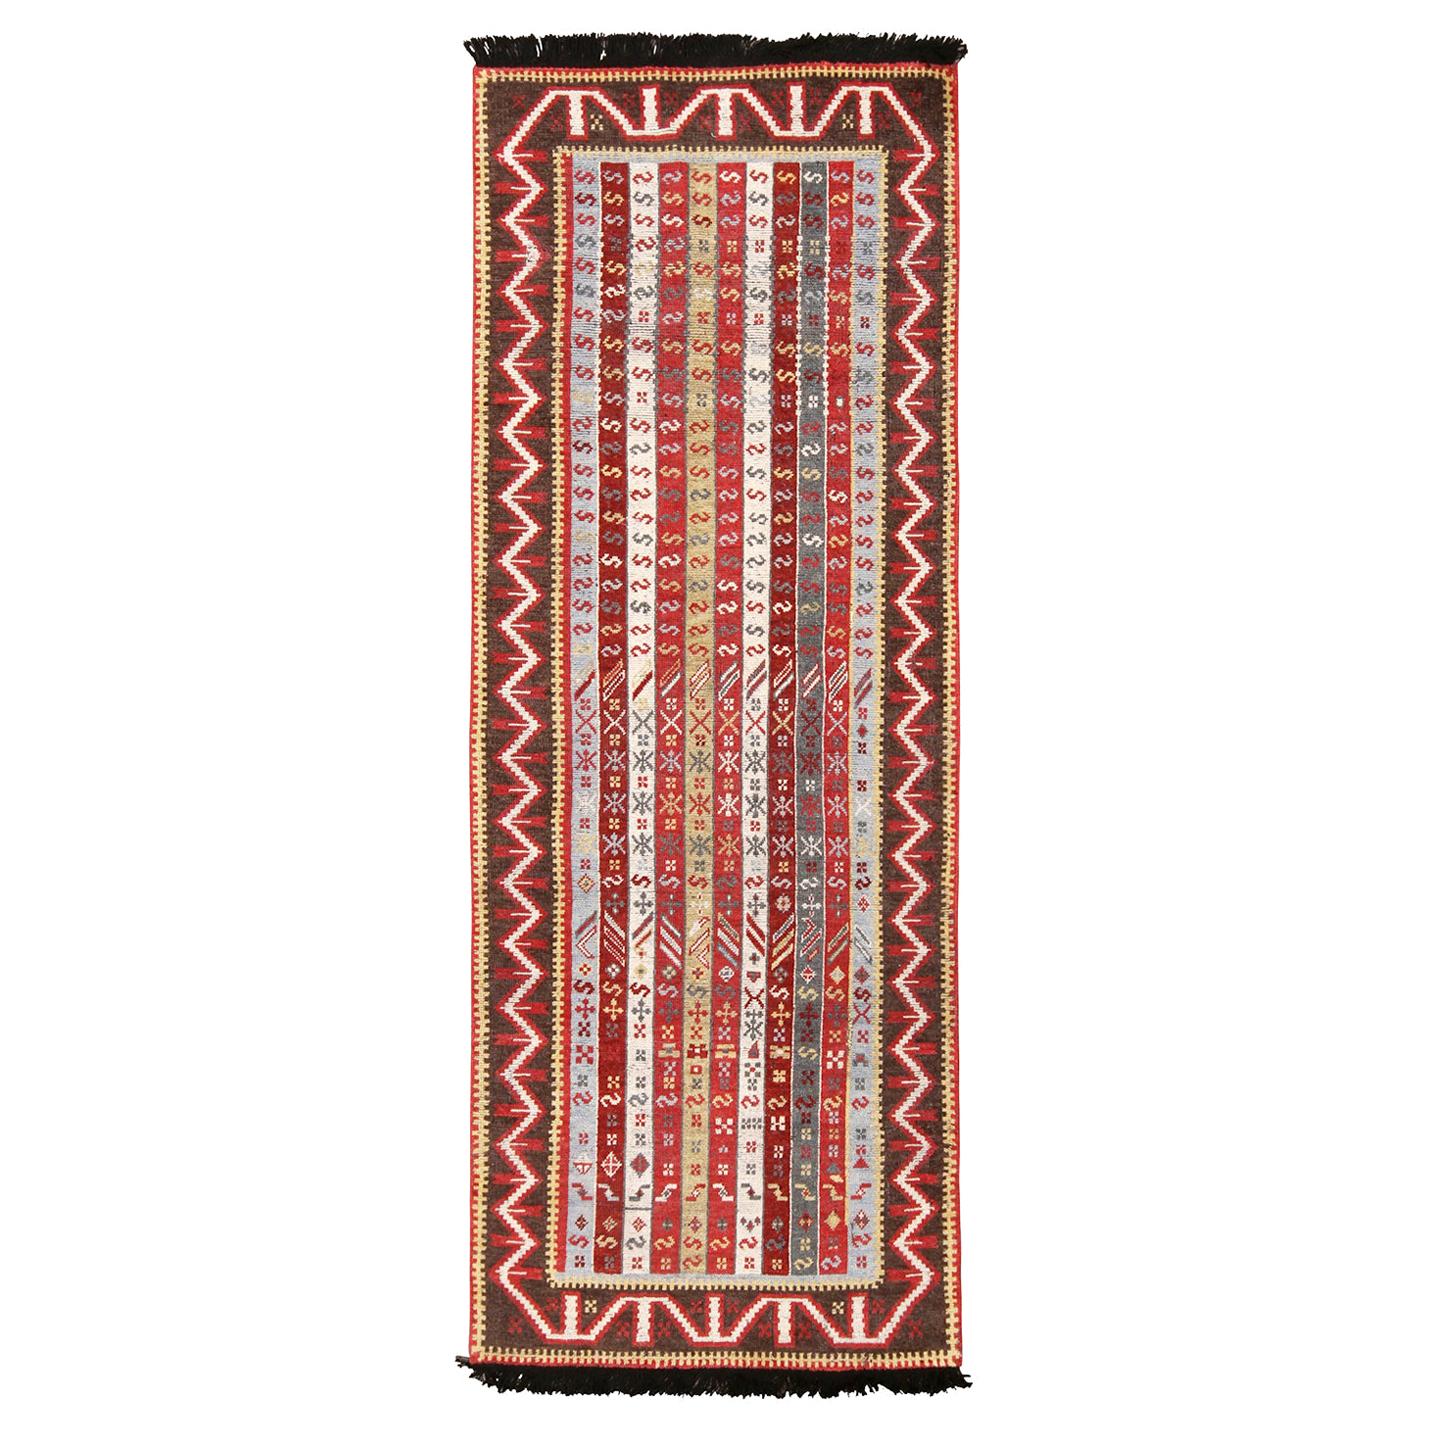 Rug & Kilim's Burano Burgundy Red and Blue Wool Runner Rug with Antique Hook For Sale